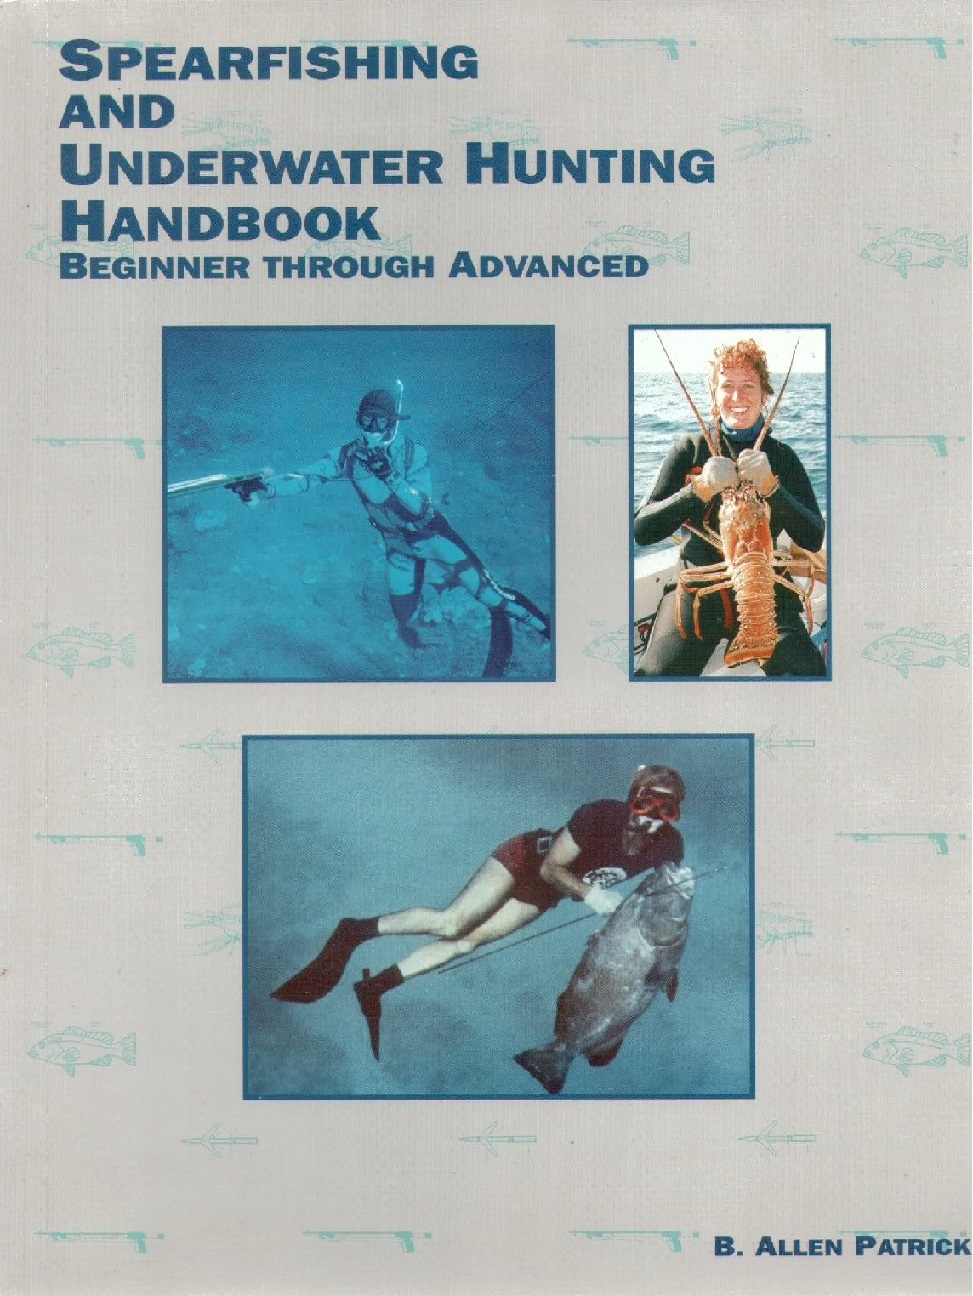 spearfishinmg how to book Allen Patrick R.jpg